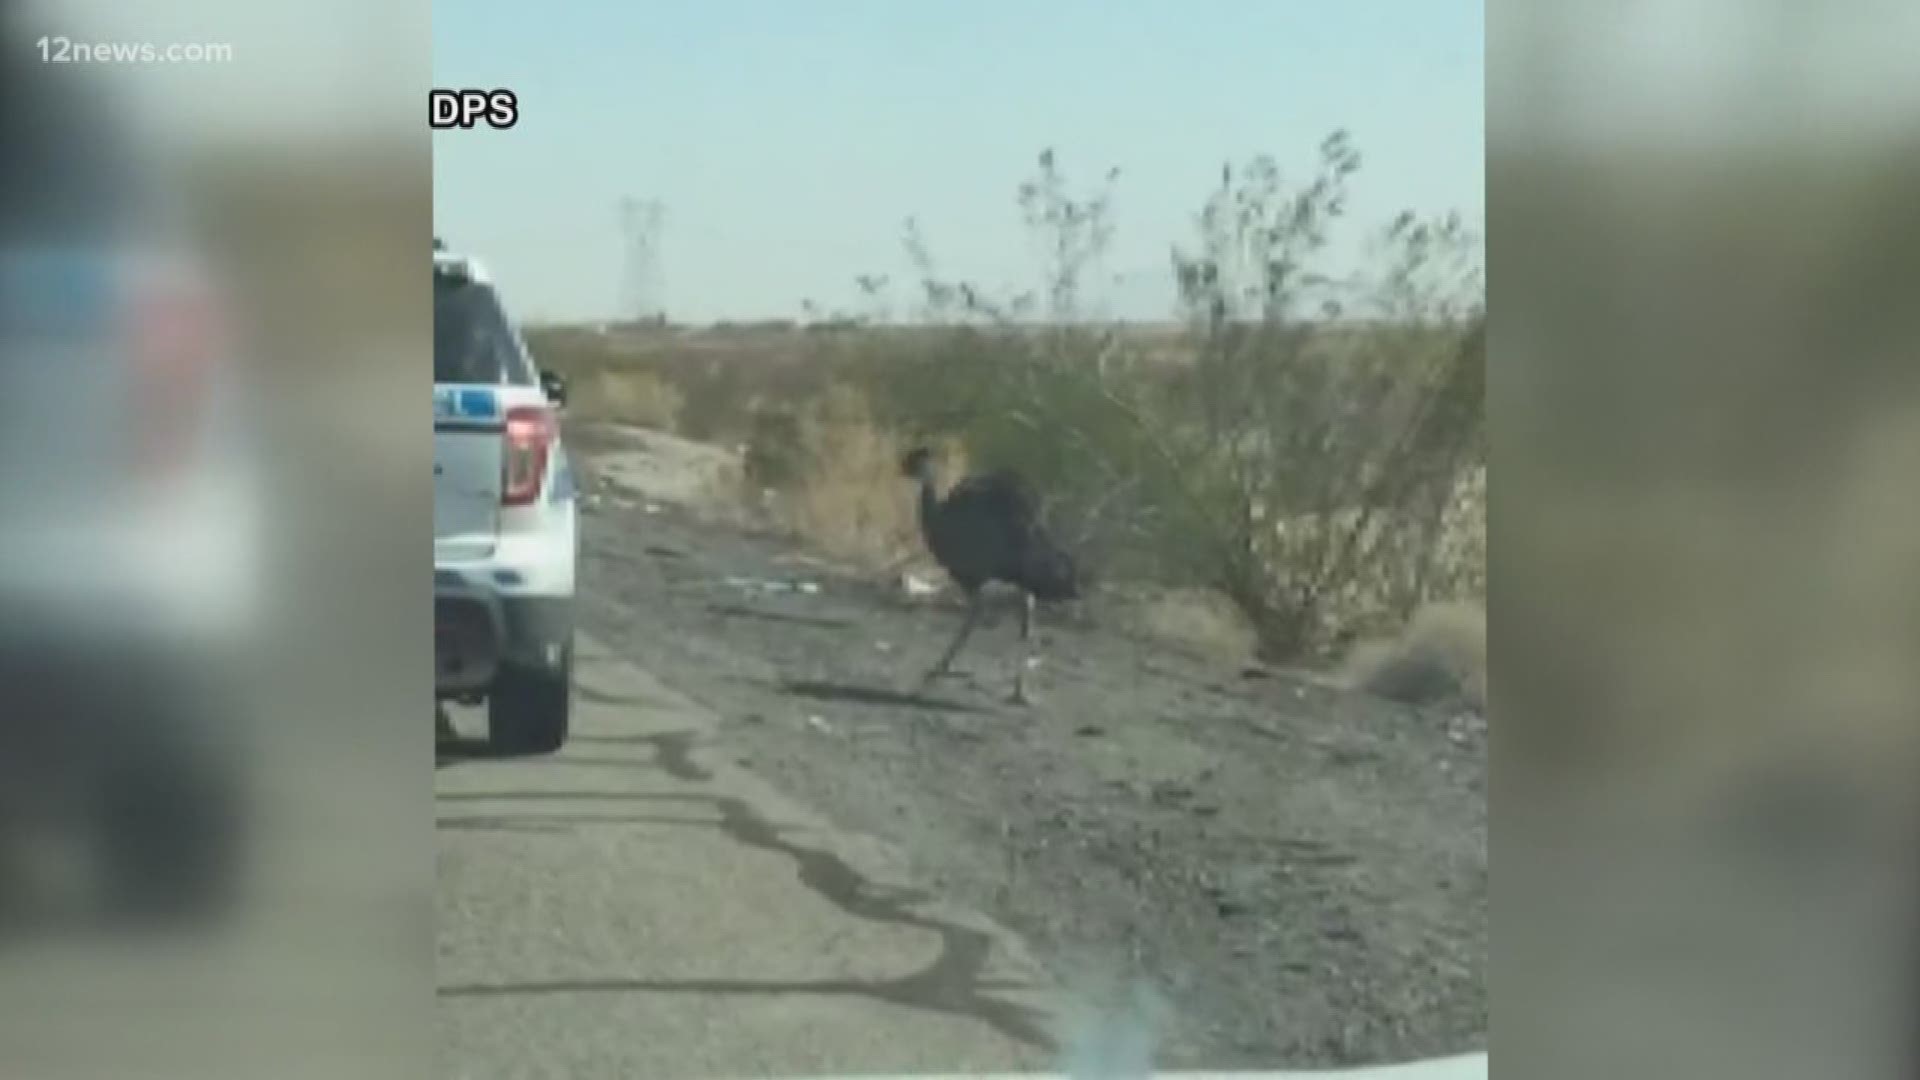 Never in a million years did DPS Trooper Doug Gagna think he would be called upon to wrangle an emu from a highway. But he was and he did! Trooper Gagna tells 12 News about how he got the bird back to its owner safely.